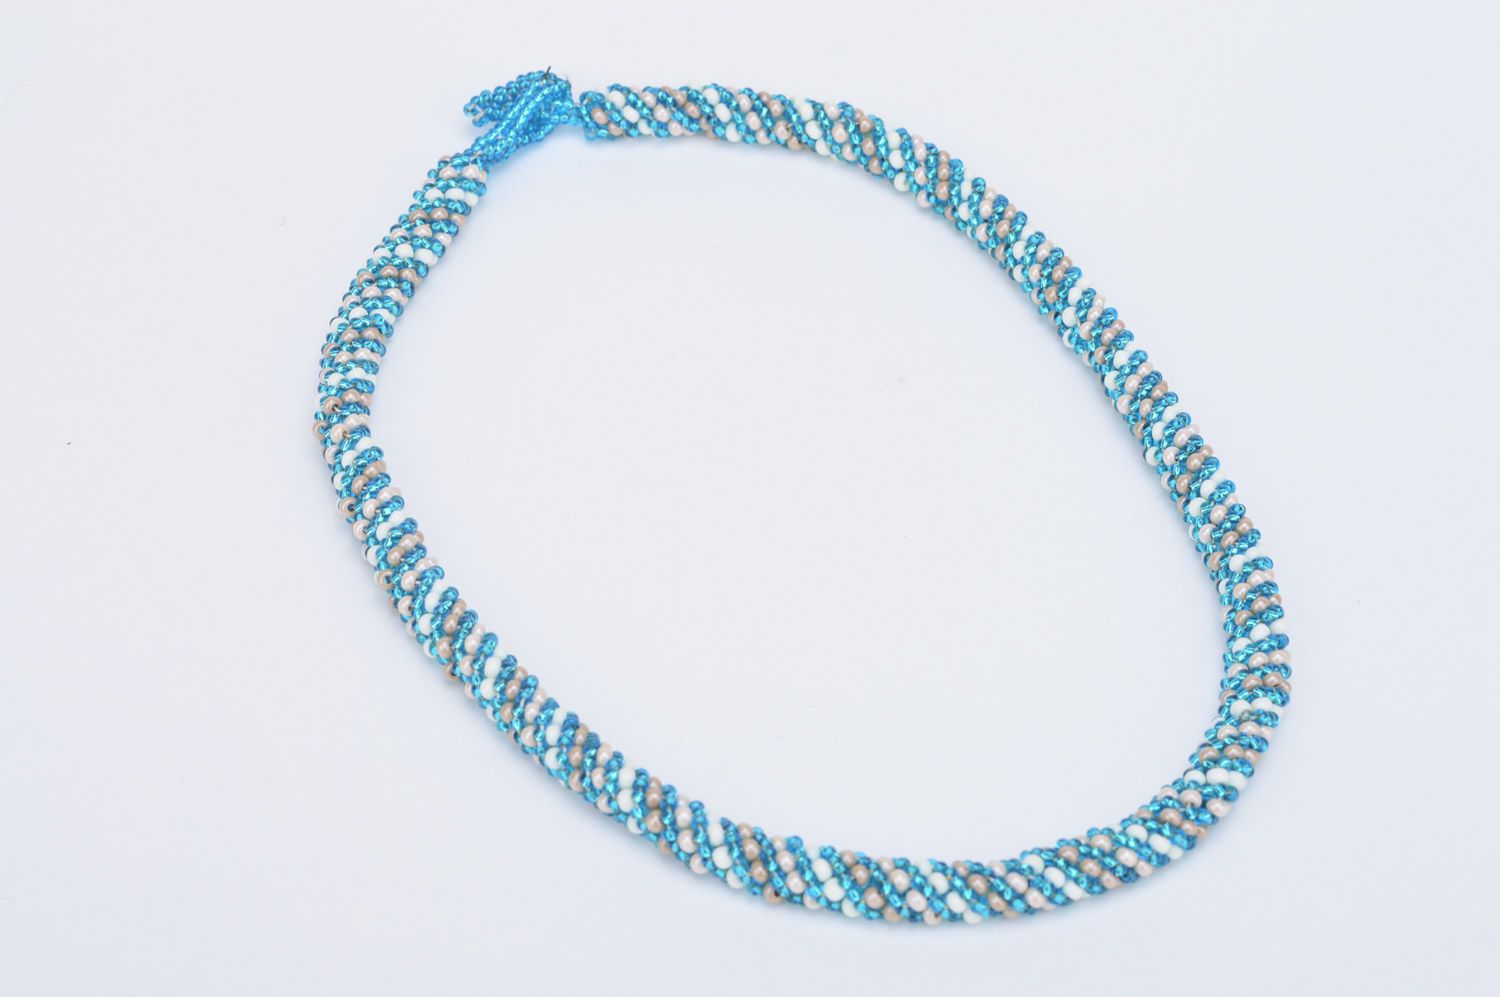 Handmade tender beaded cord necklace in blue and white colors for women photo 2